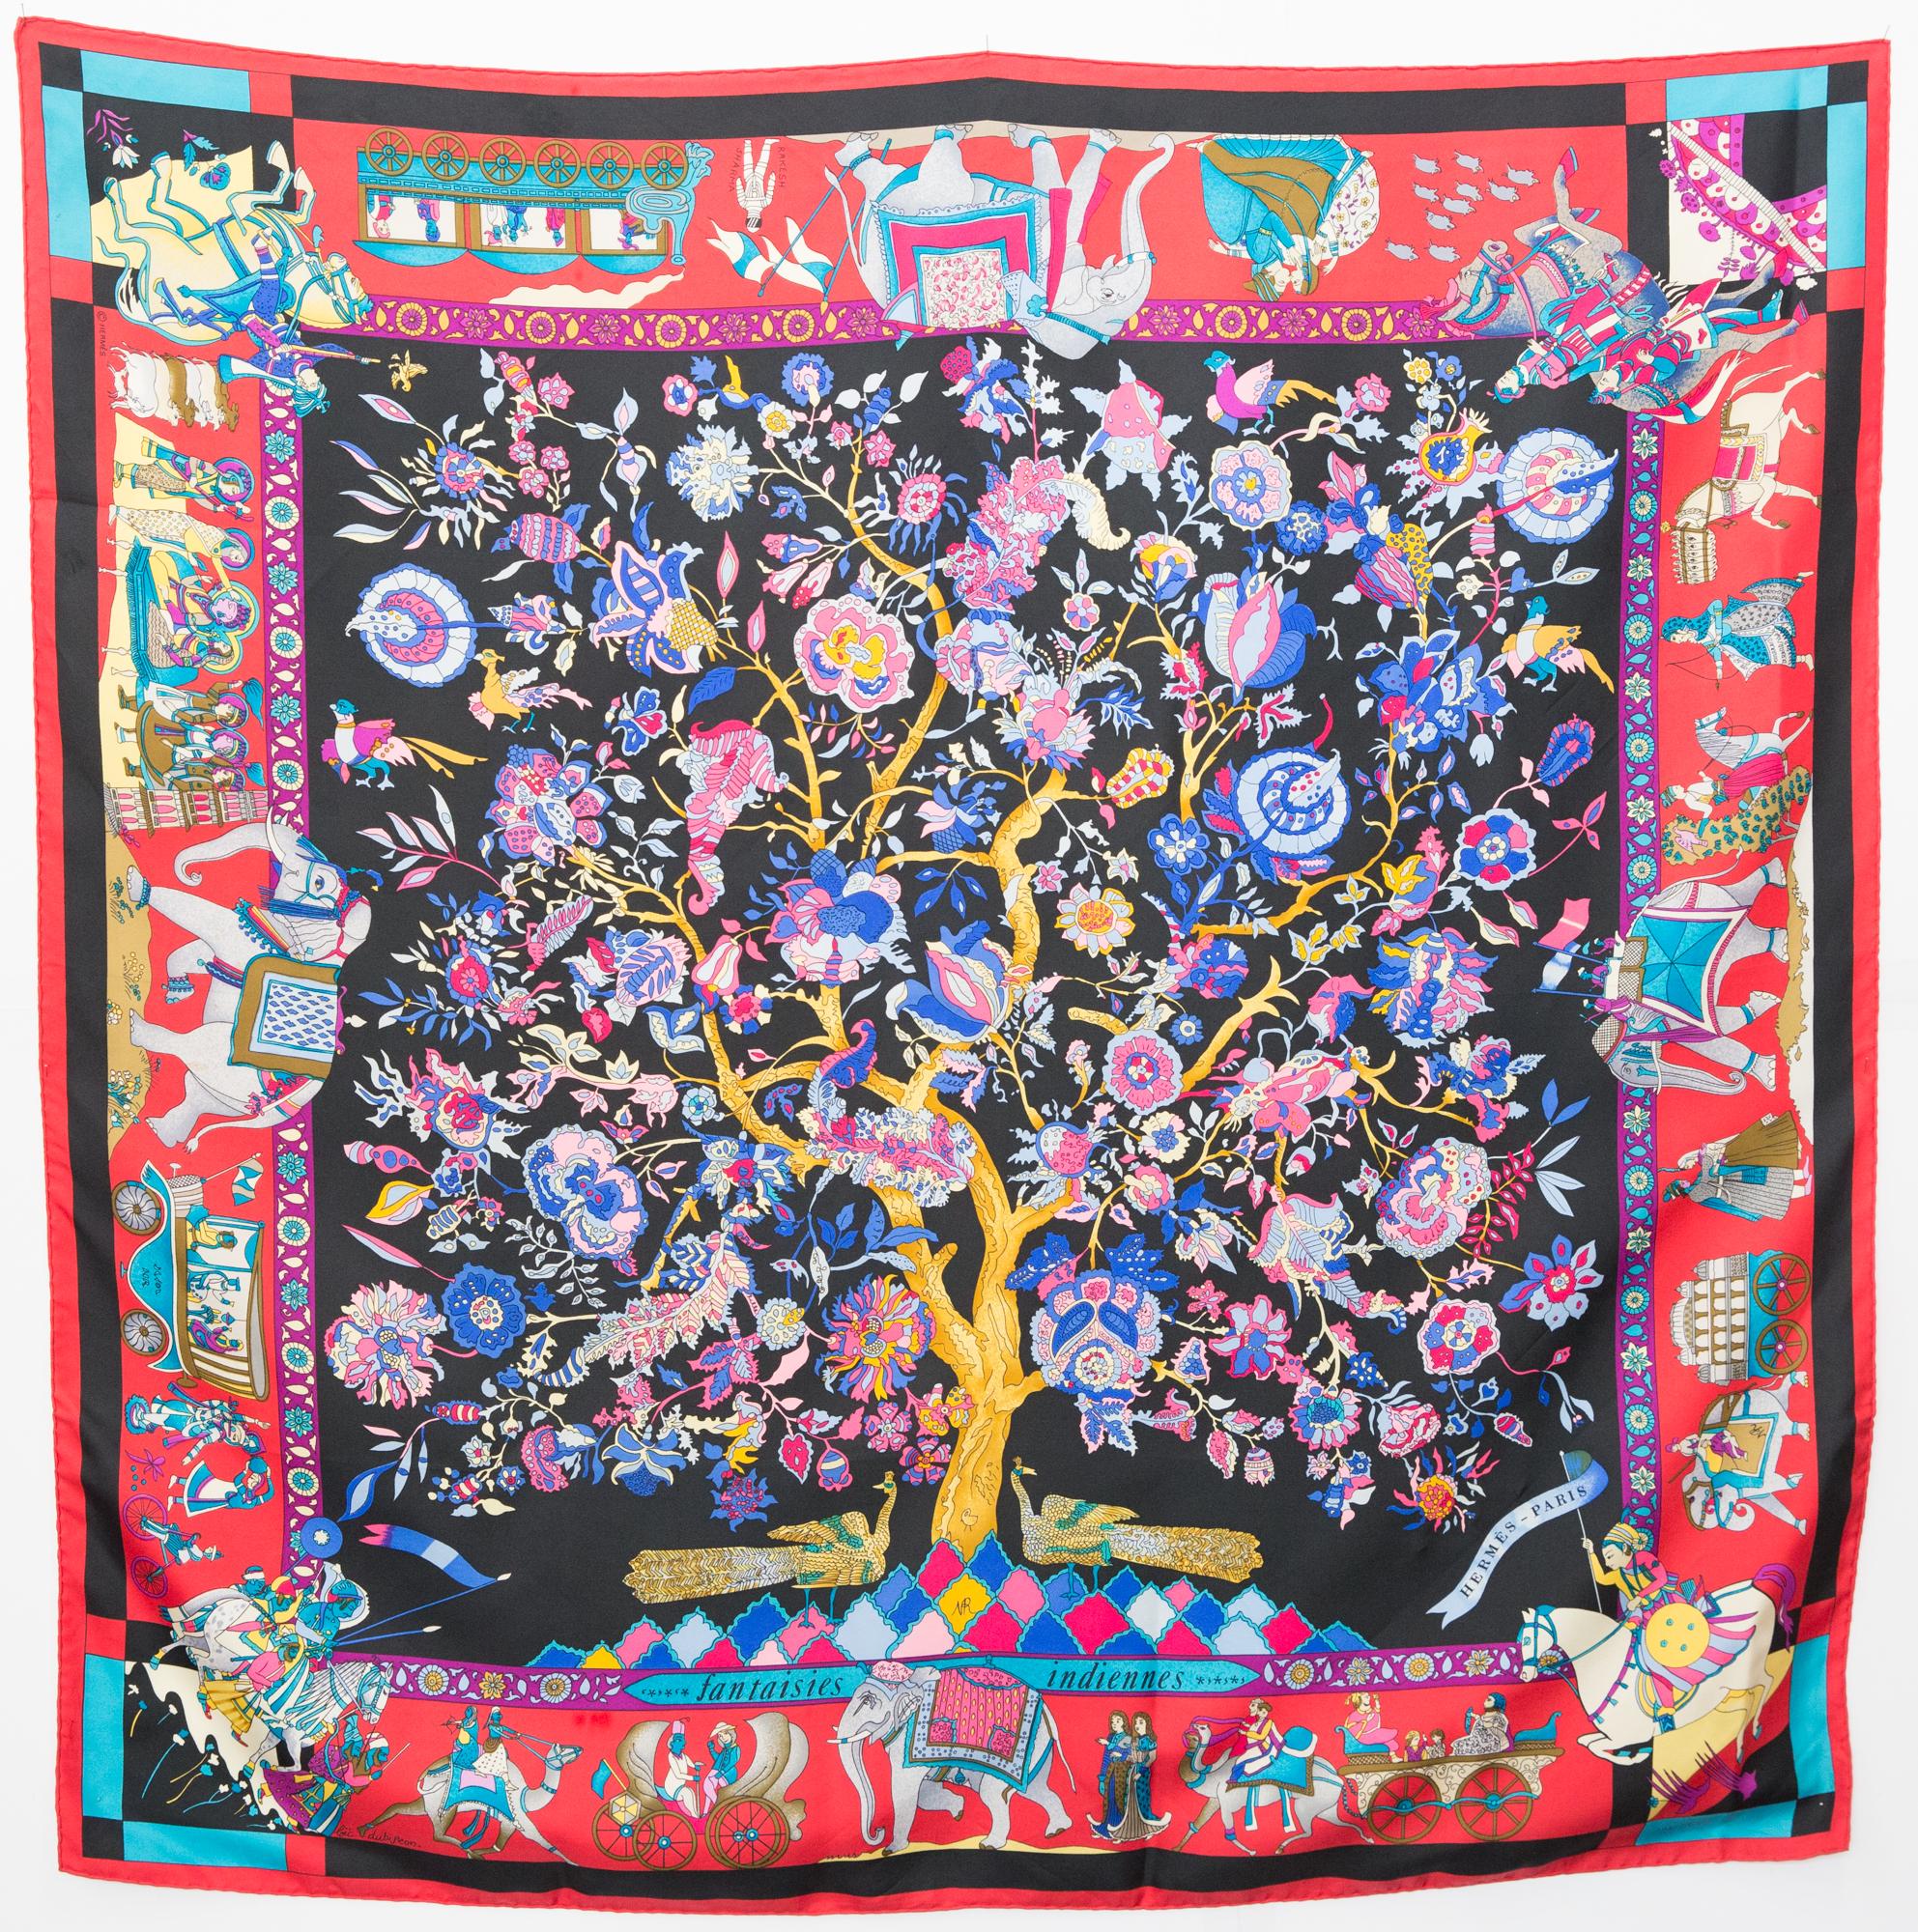 Hermes silk scarf Fantaisies indiennes » by Loïc Dubigeon featuring a red border and a Hermès signature. 
Rare 